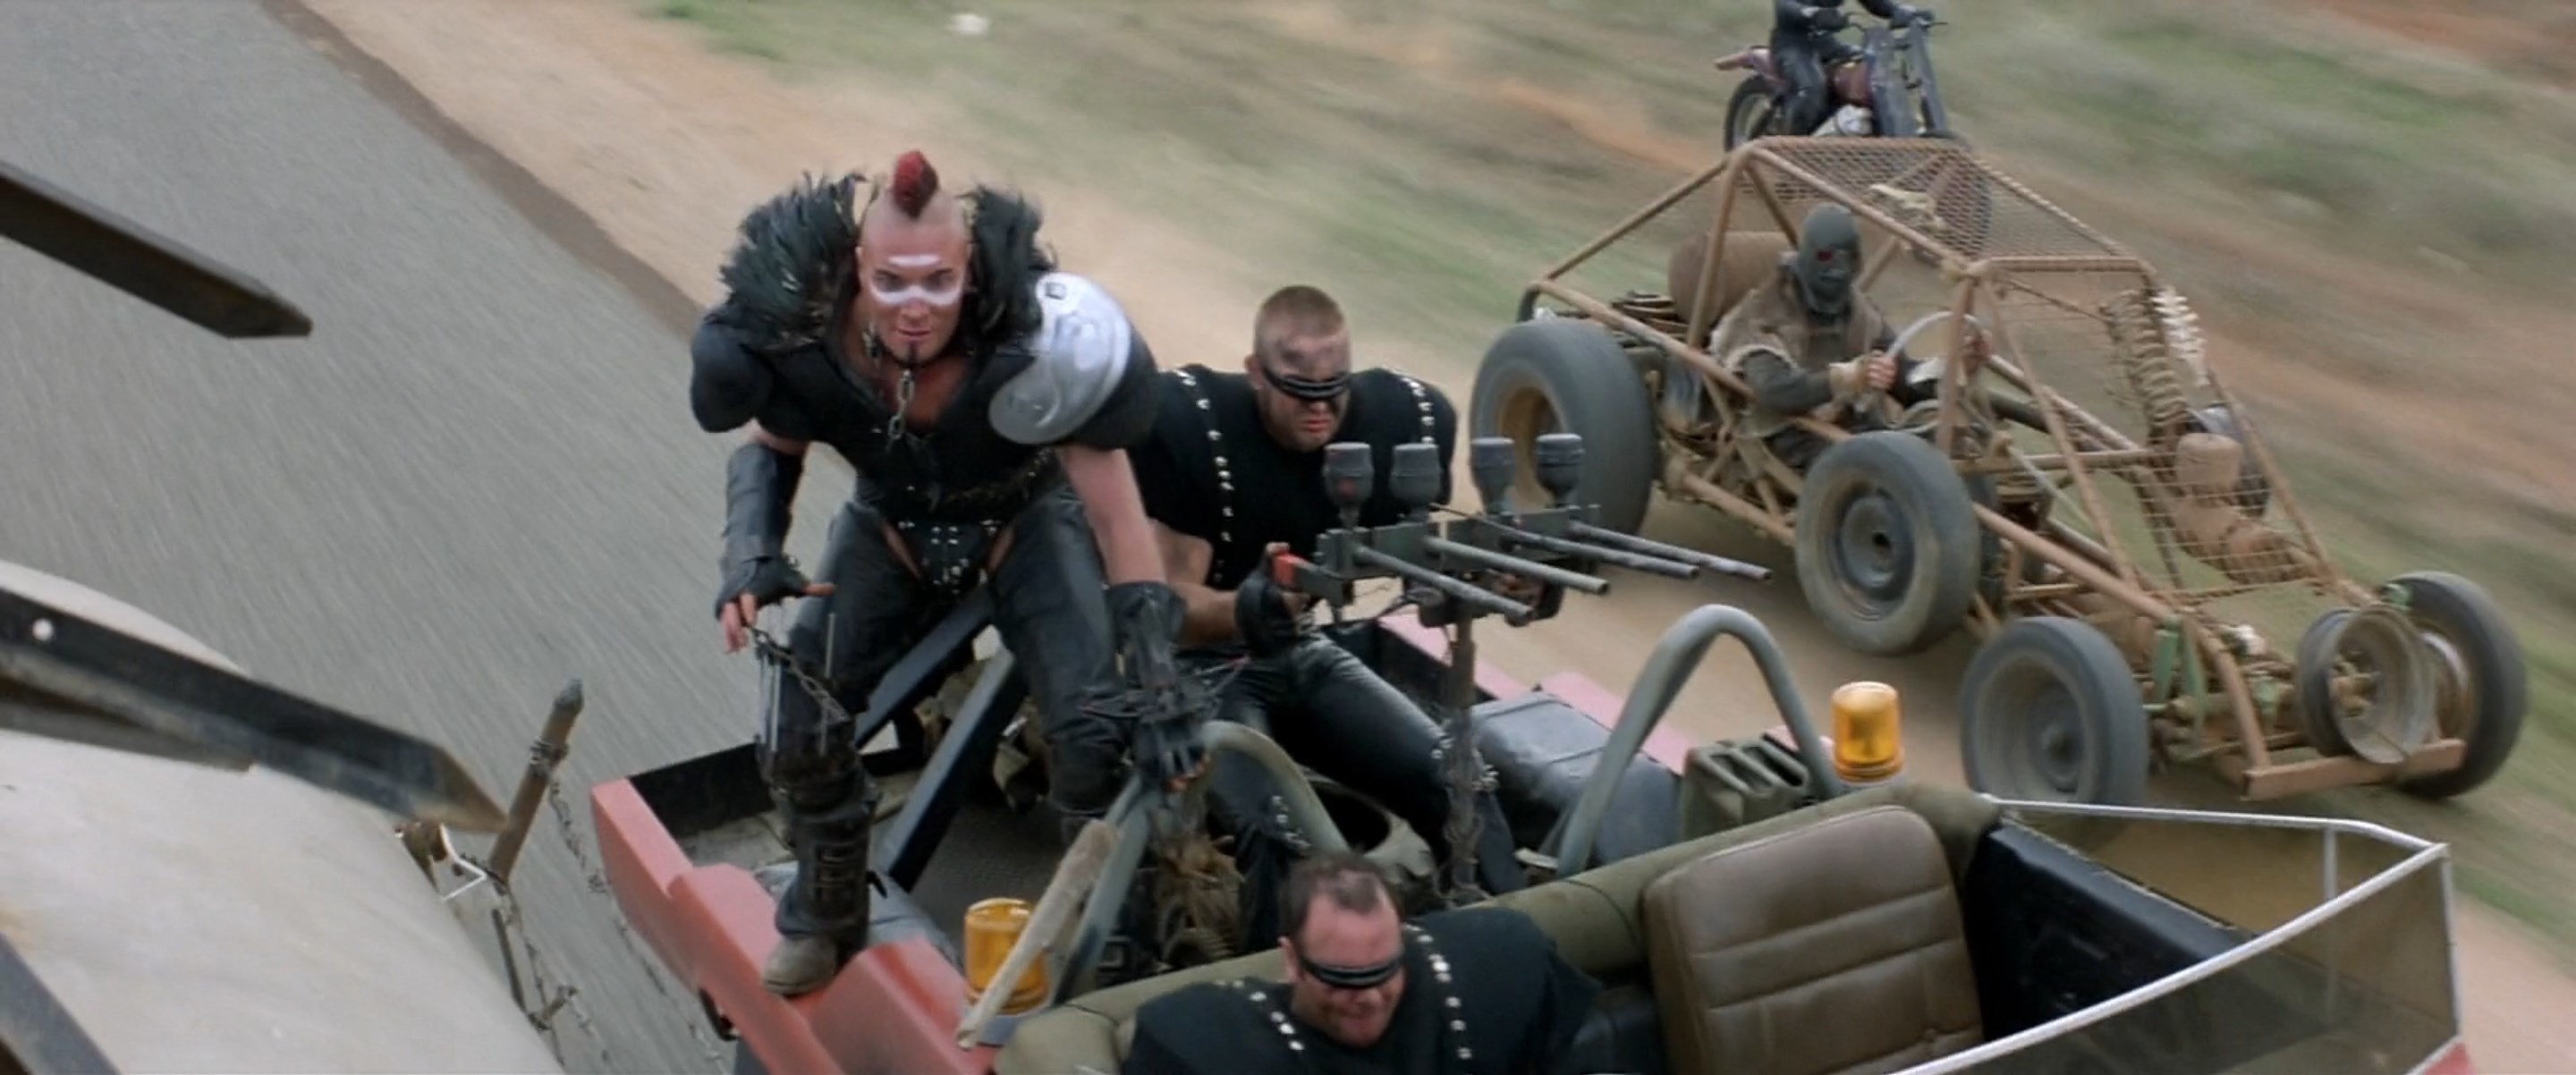 2880x1202 HDQ Images mad max 2 the road warrior